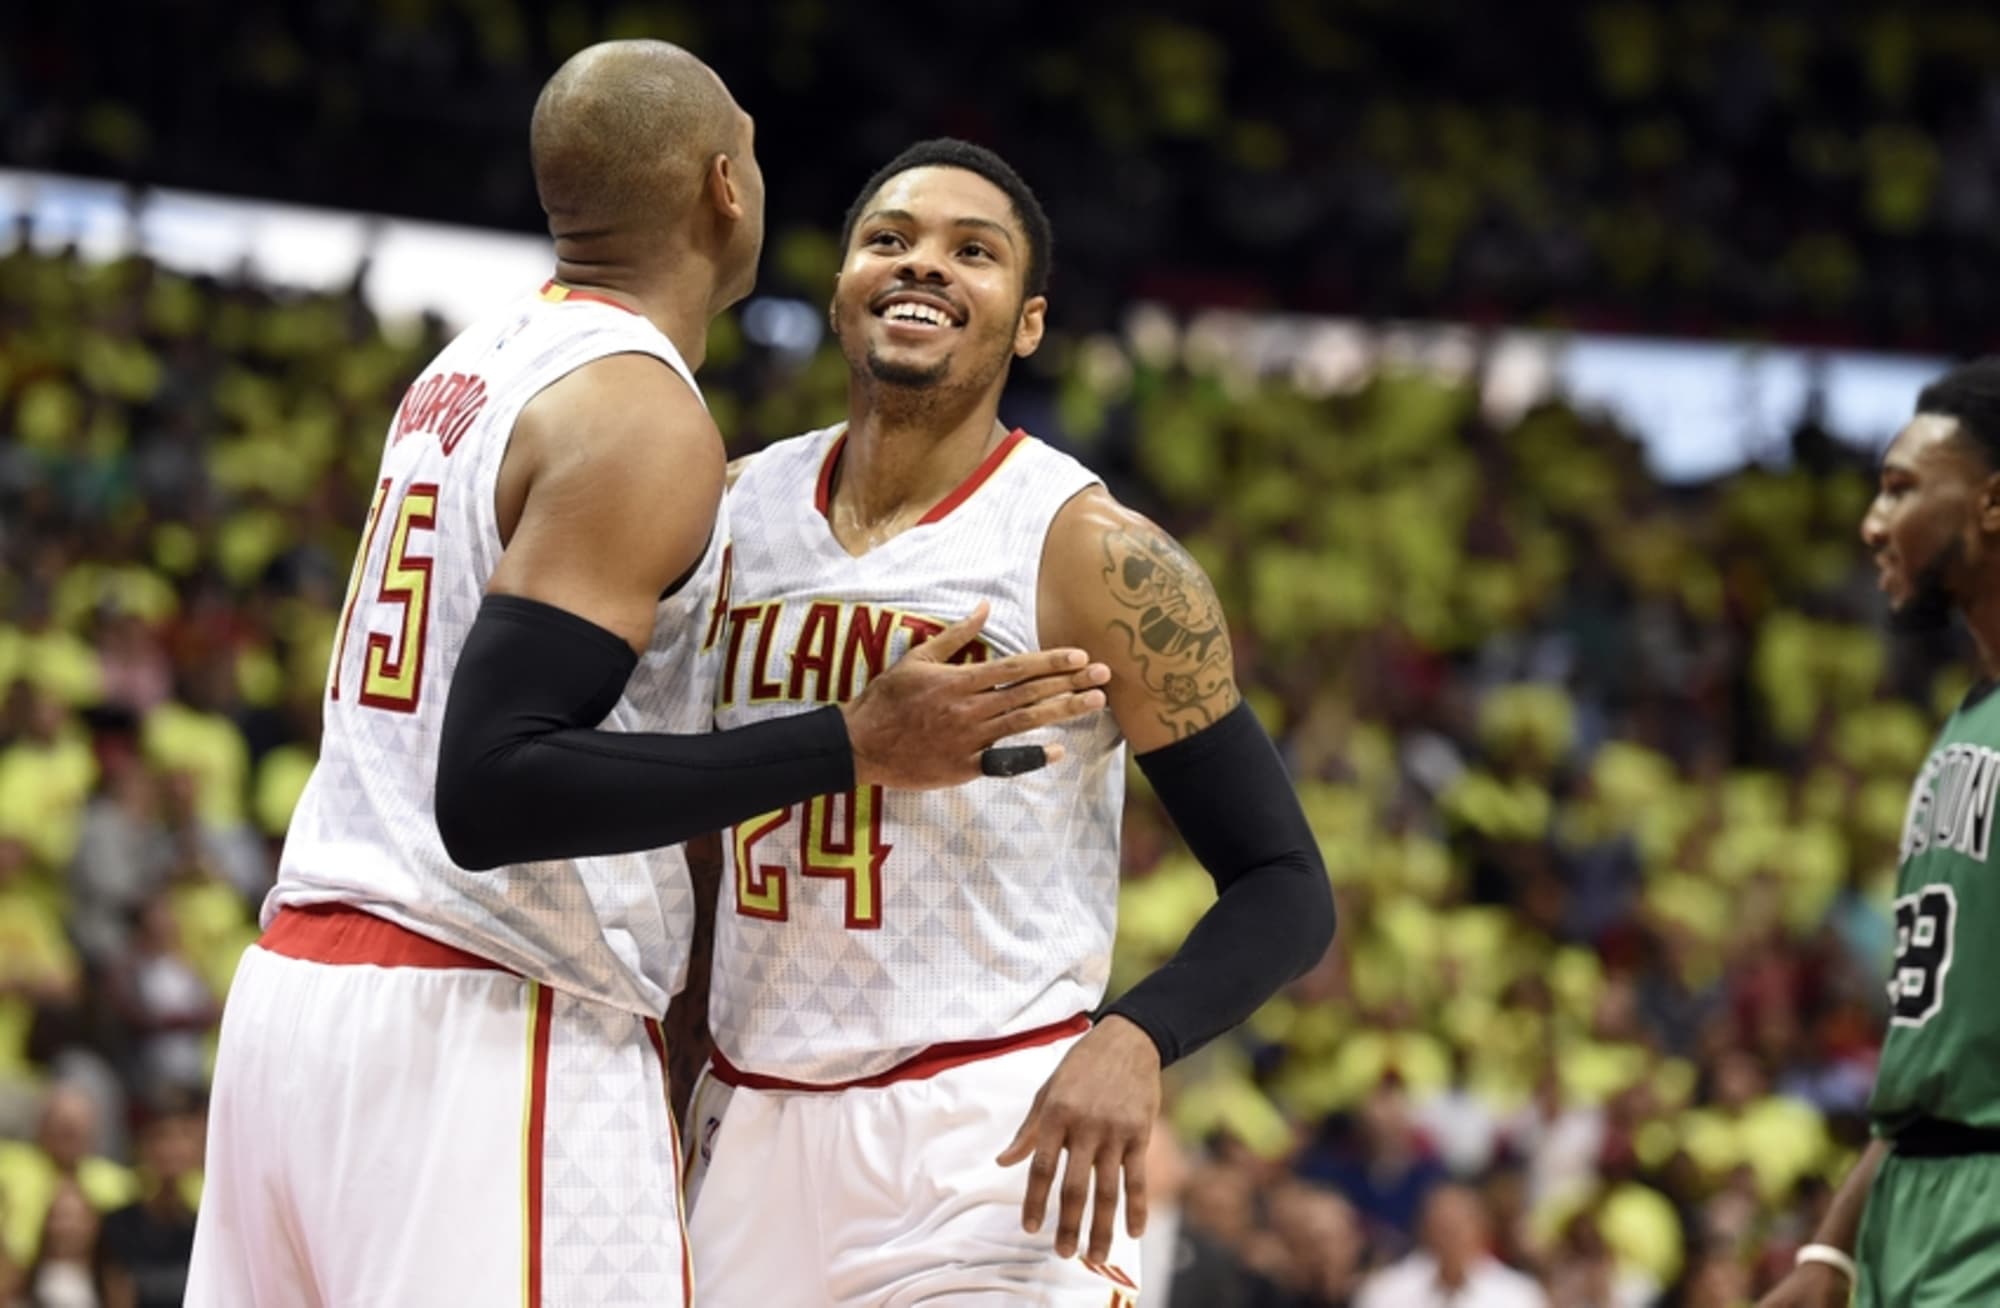 Bazemore starting over after foot injury